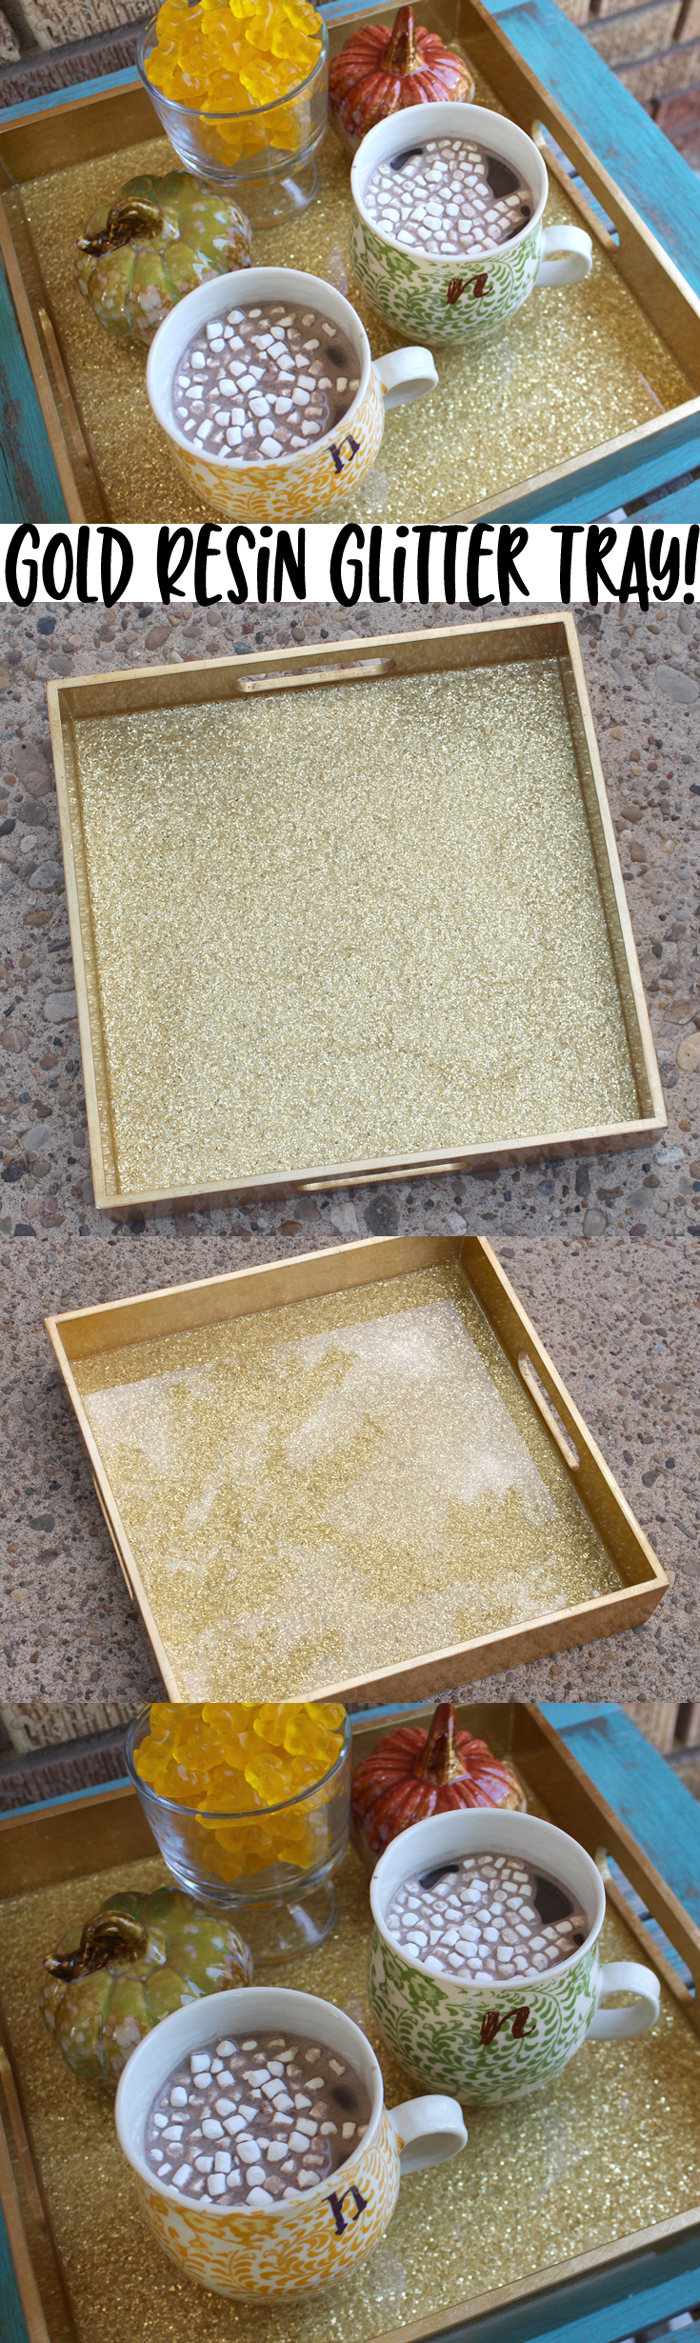 Gold glitter and sparkles are perfection for Autumn and that transition into Winter.  This glitter tray is the perfect bed tray for hot chocolate or other goodies. via @resincraftsblog